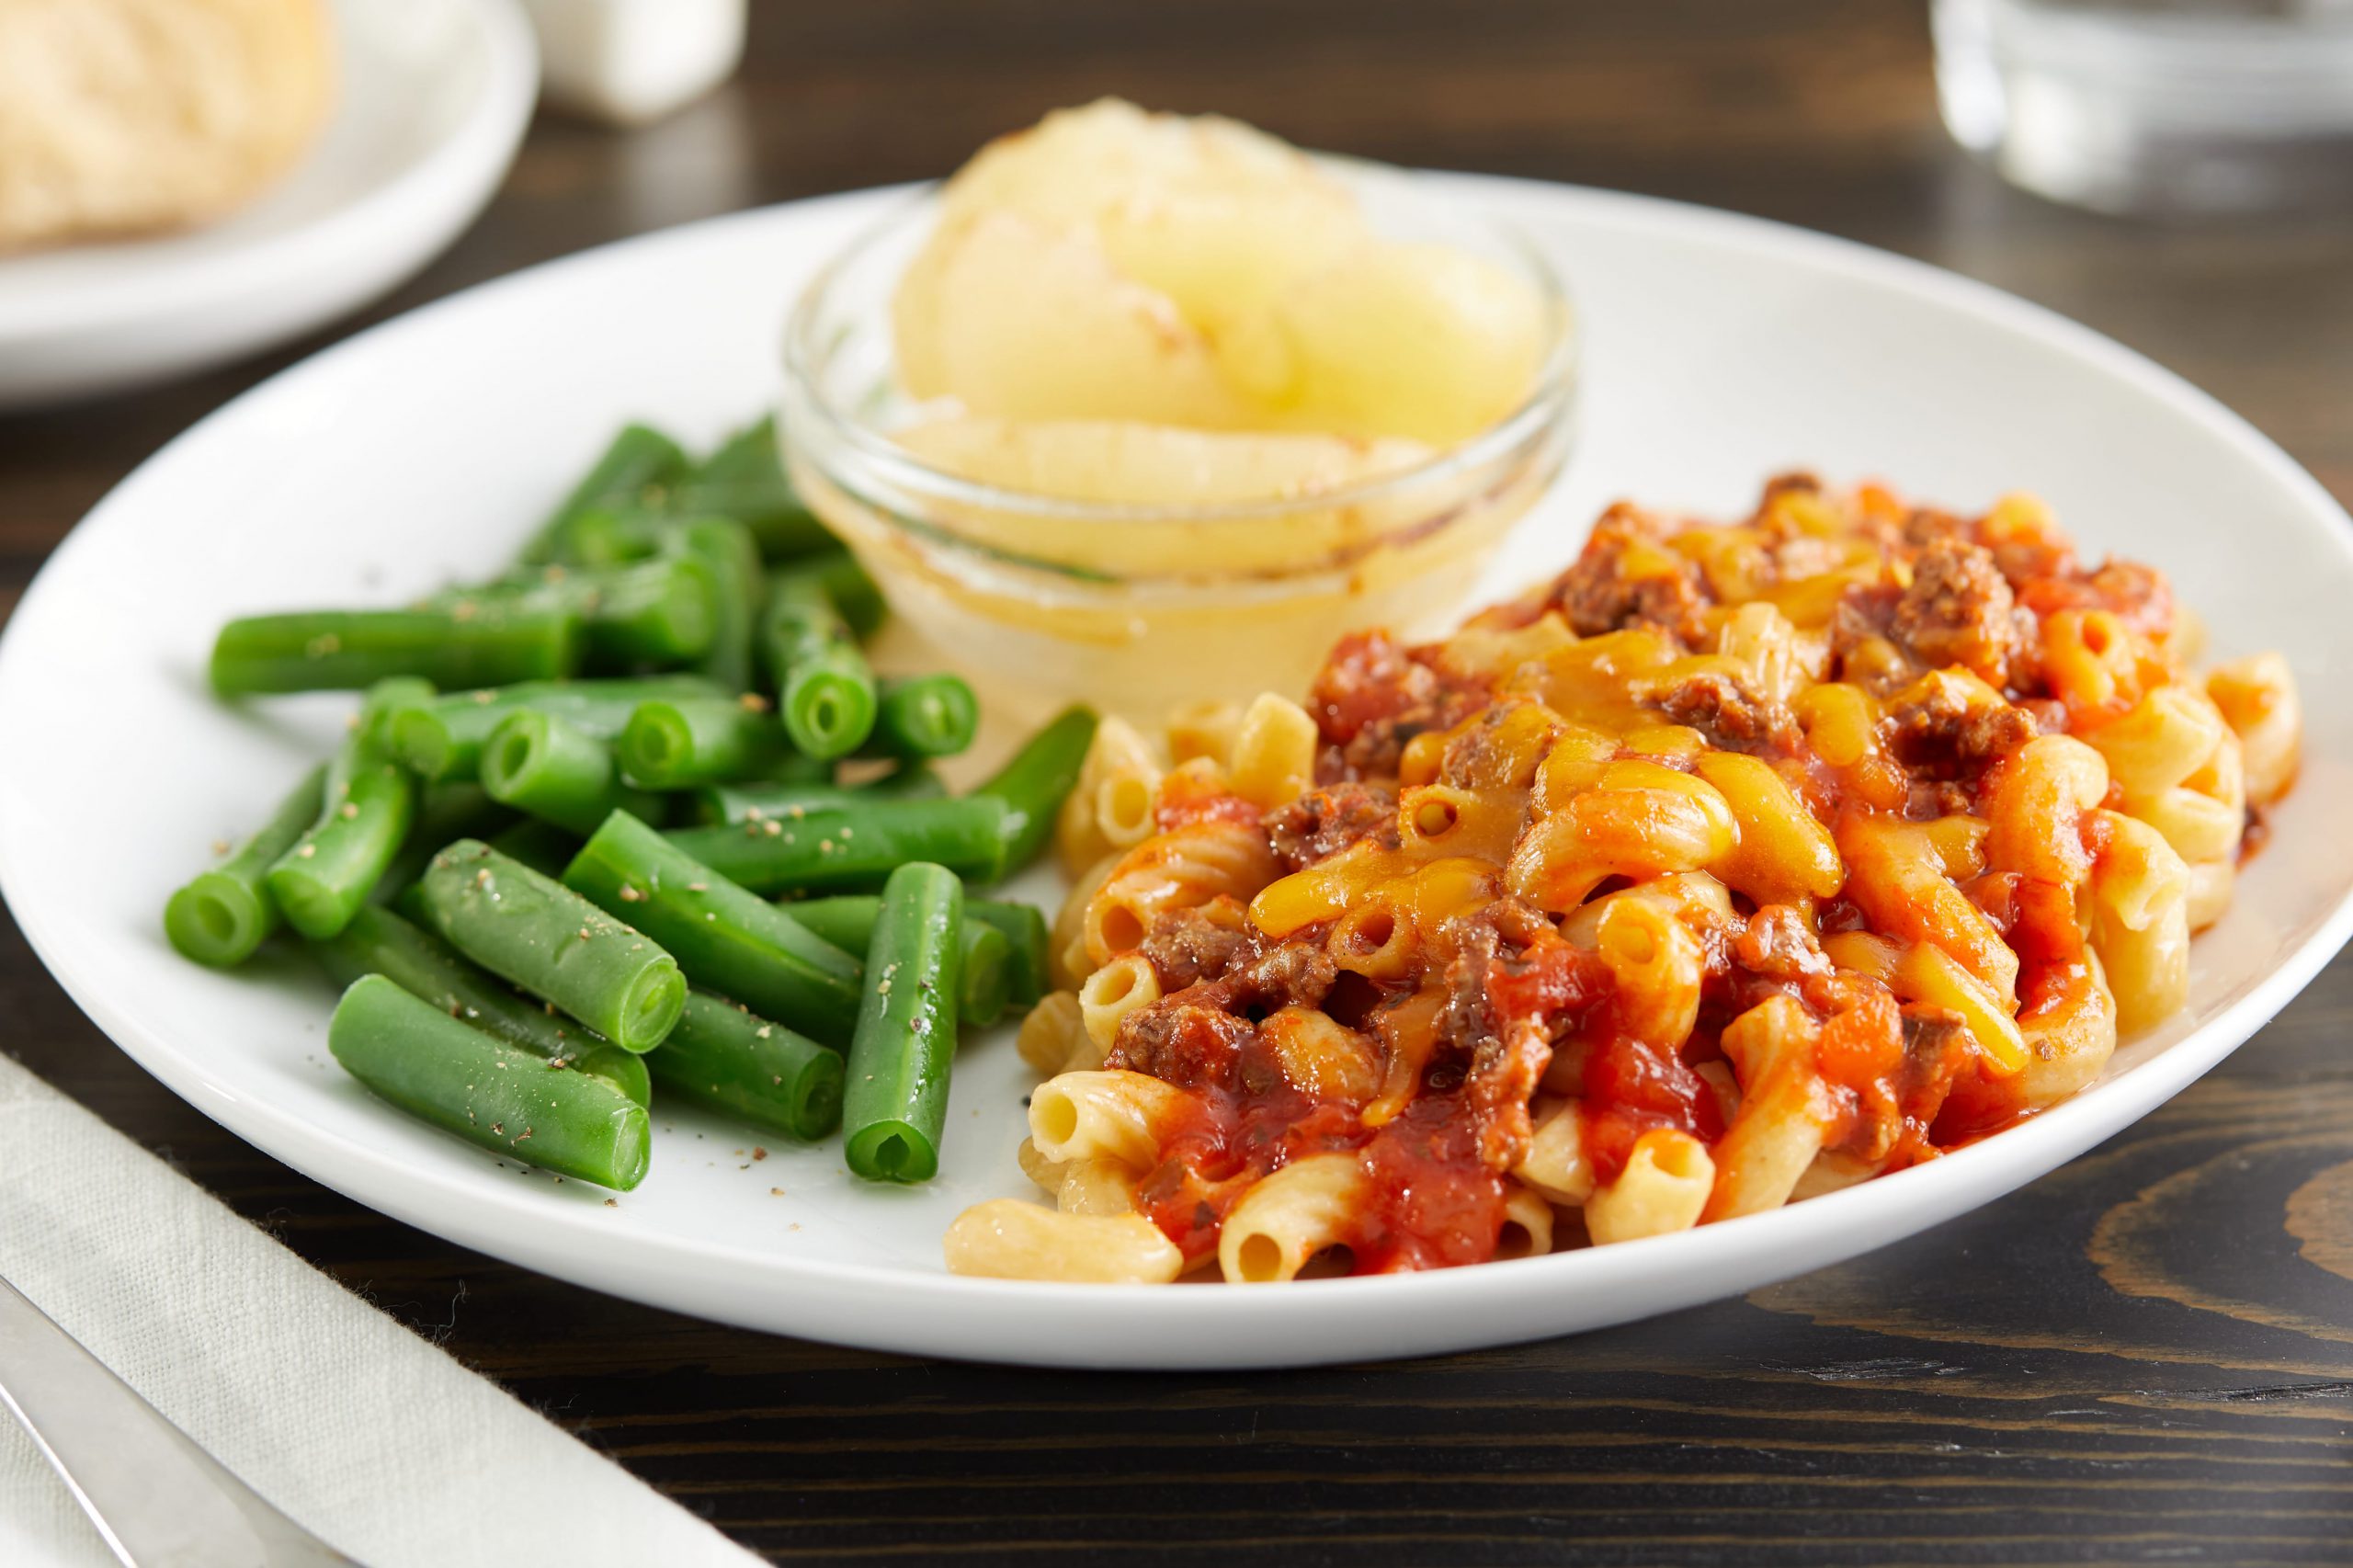 Chili mac meal with green beans and apples